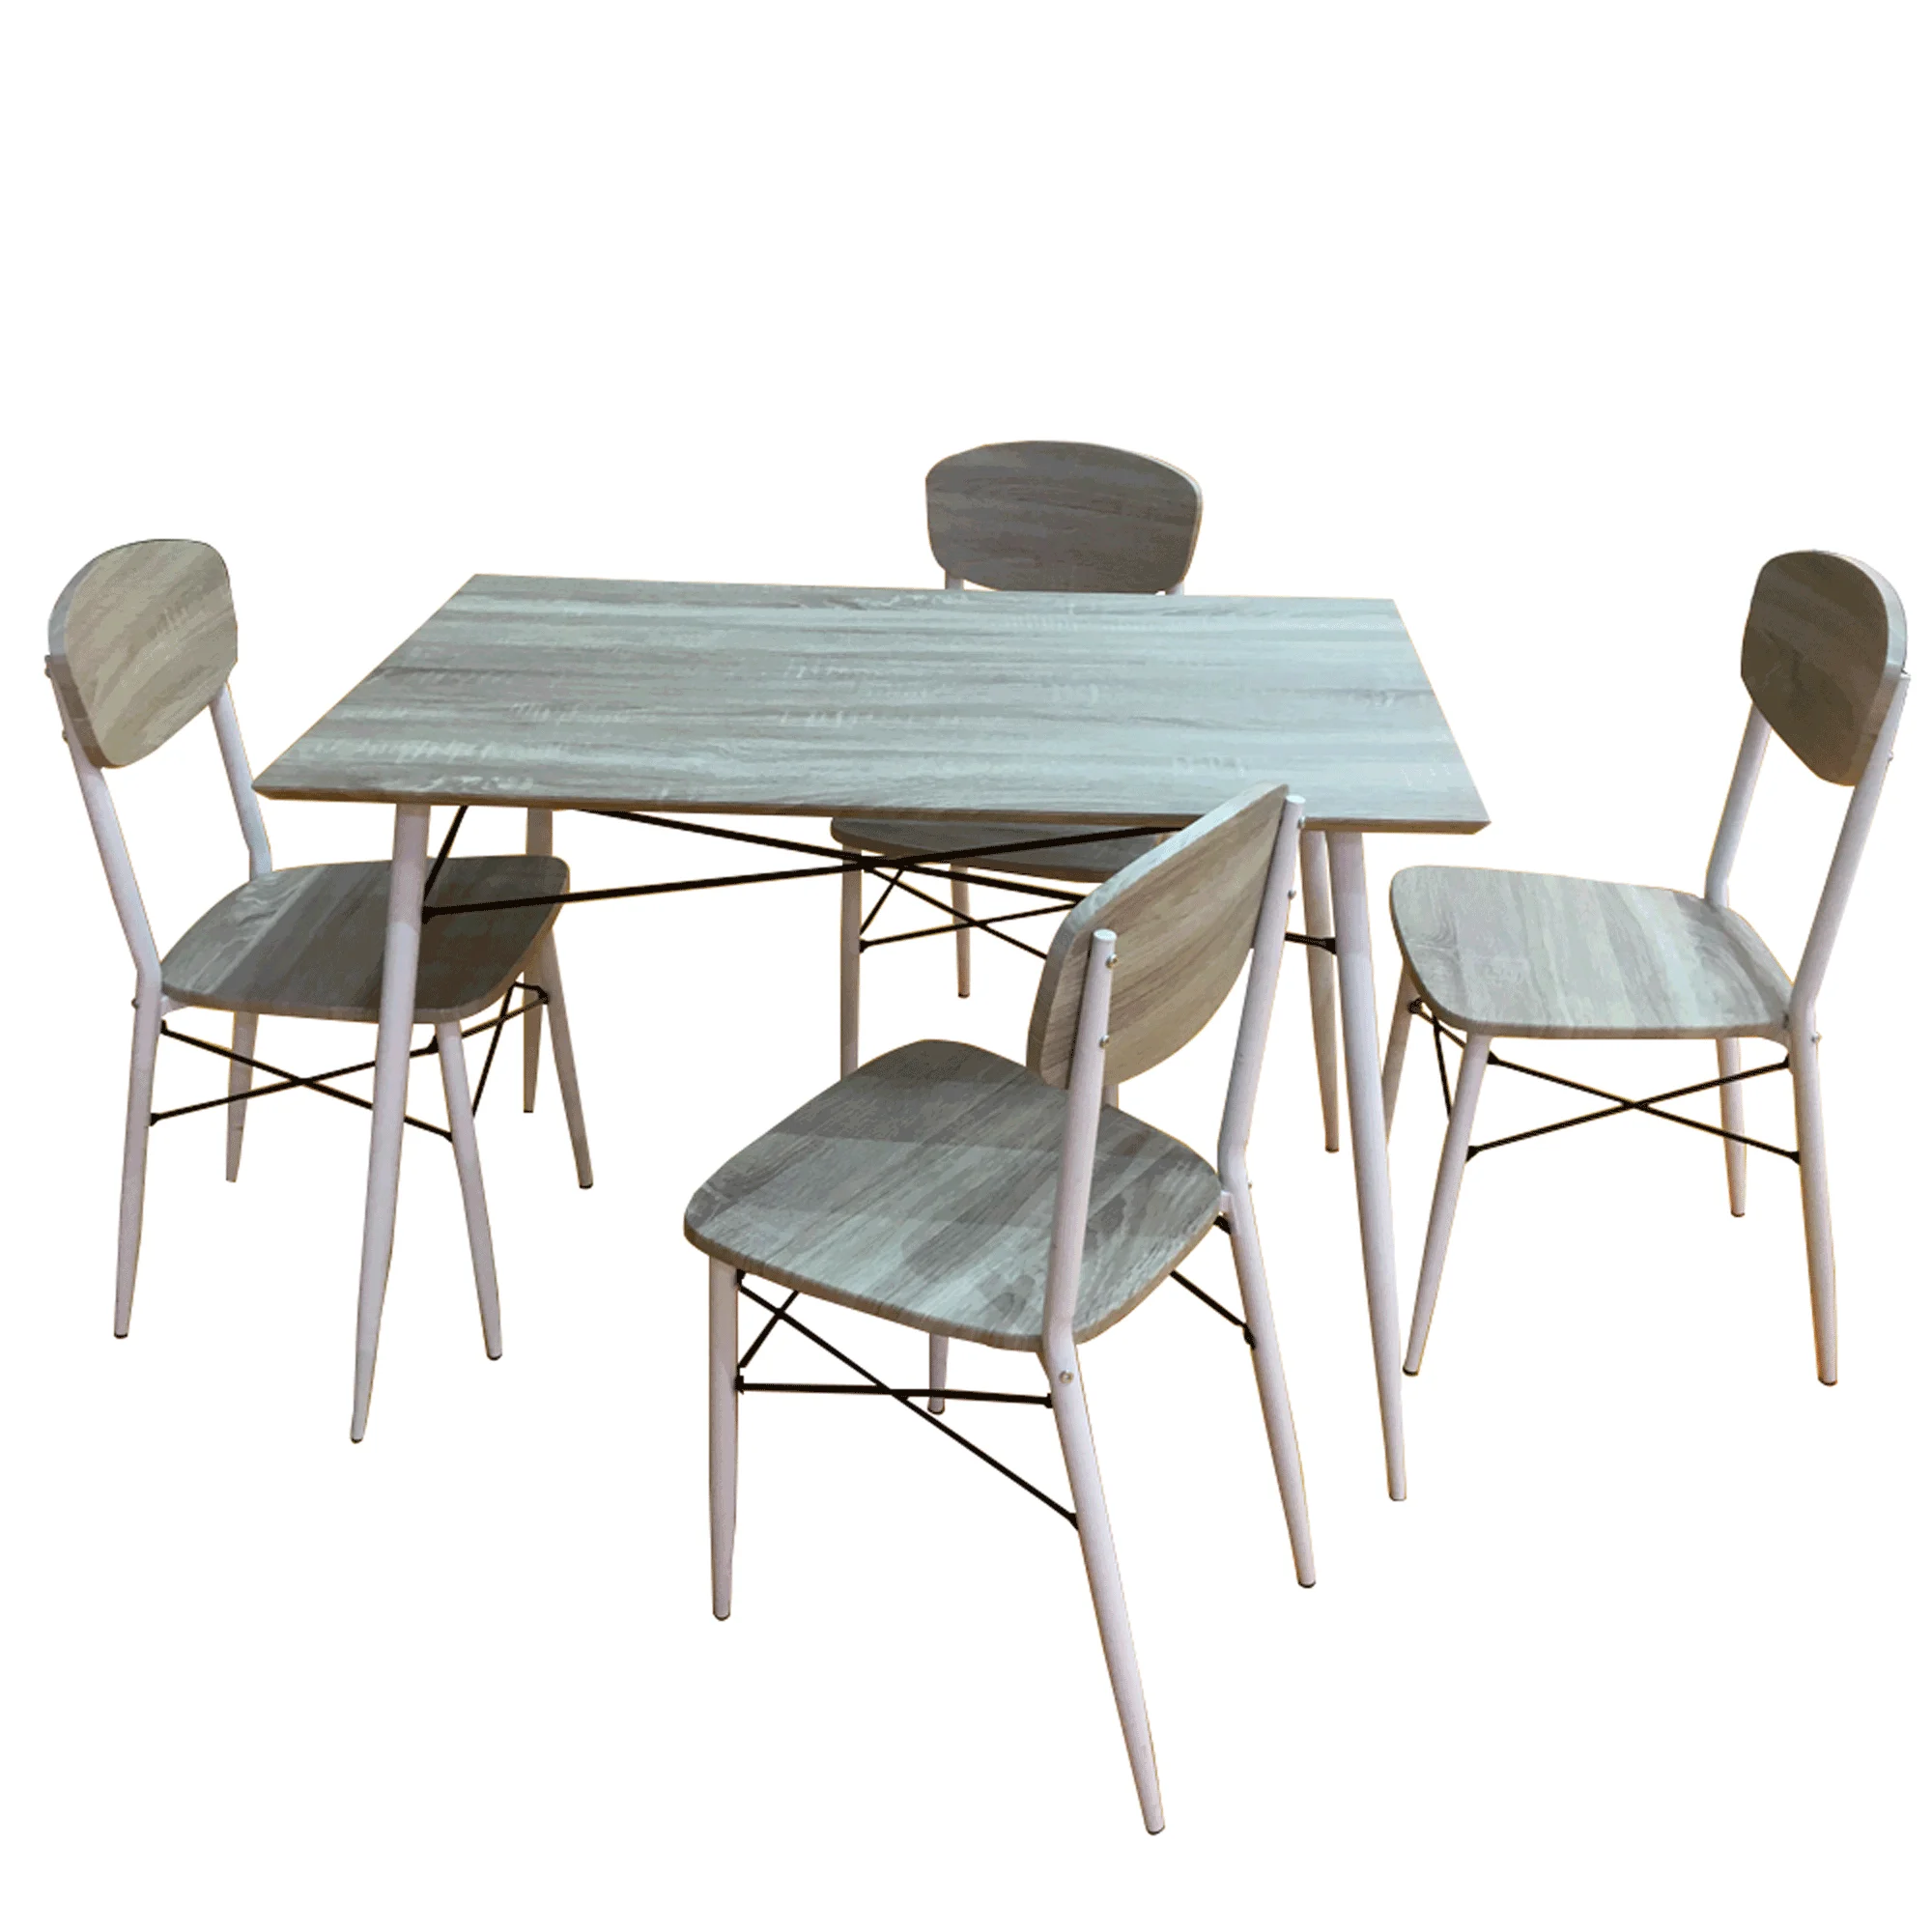 Modern Dining Table Set Dining Room Table And Chairs For Sale 4 Chair Dining Table Set Buy Modern Dining Table Set